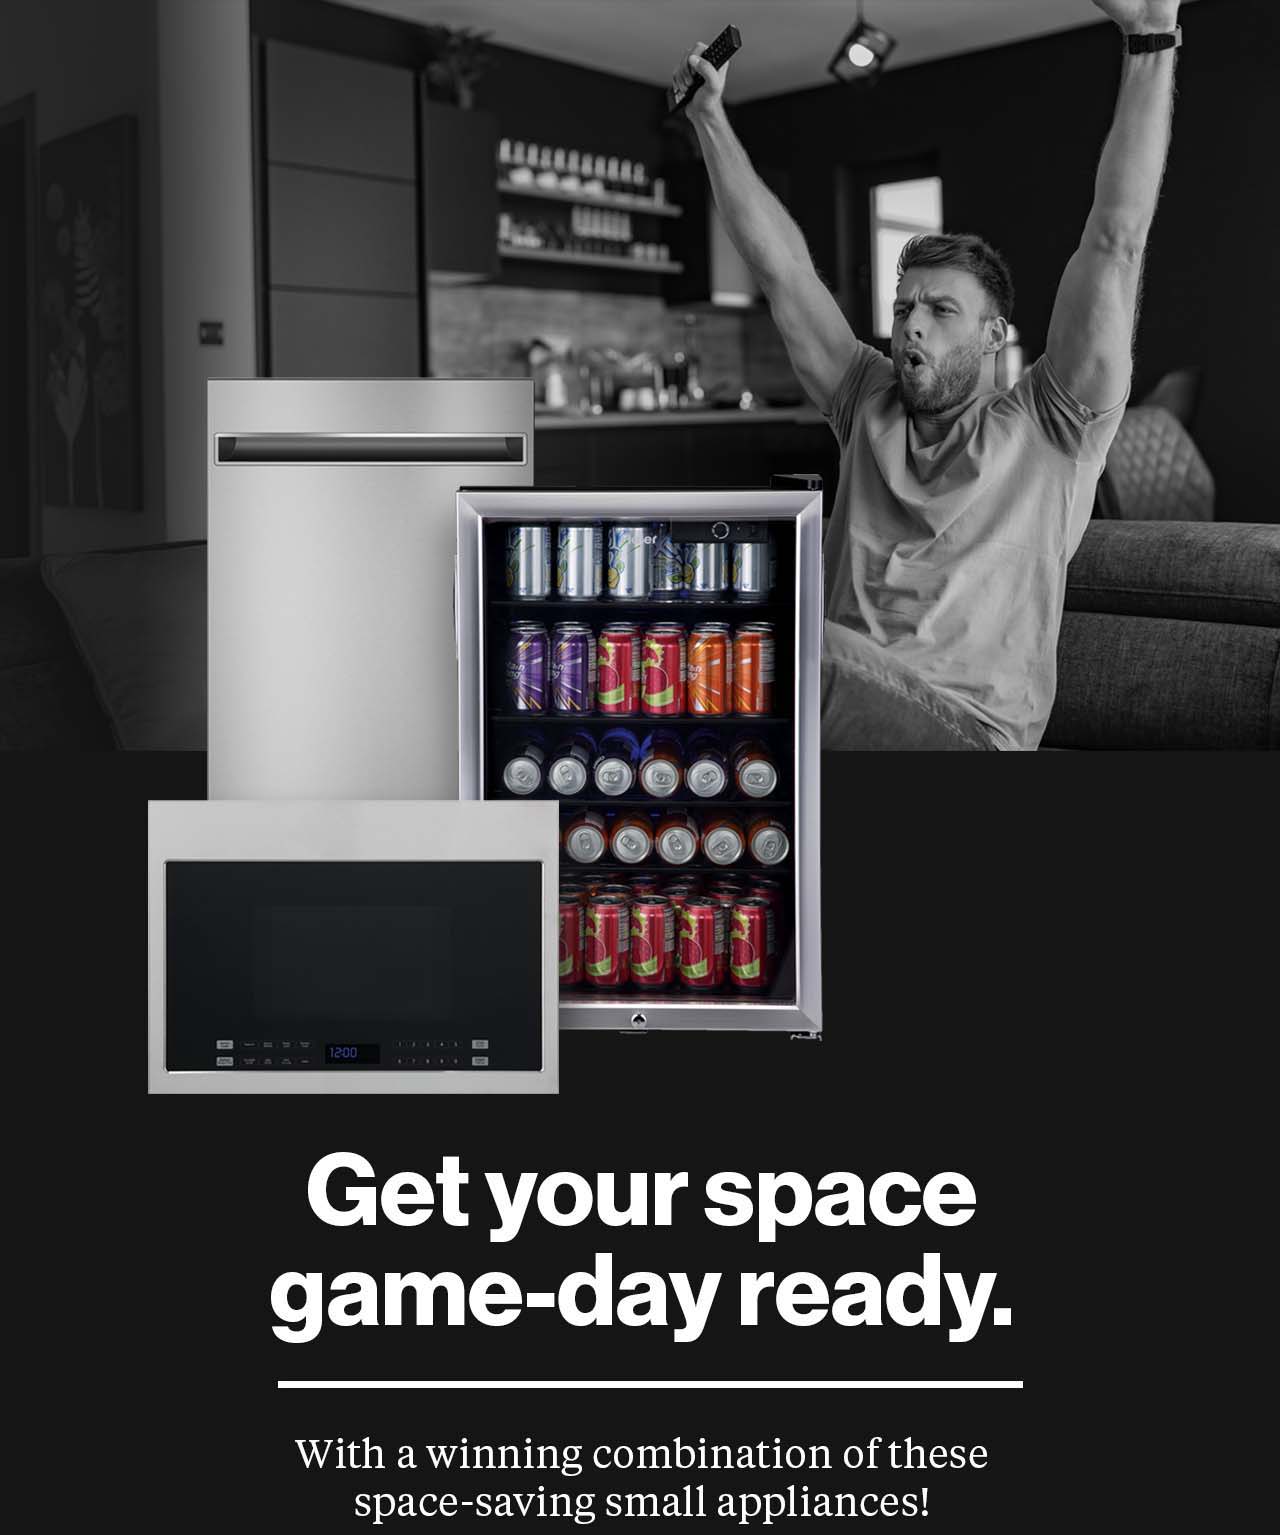 Get your space game-day ready with a winning combination of these space-saving small appliances! Cutout pictures of a small dishwasher, microwave oven and a full beverage center overlaid on a photo of a young man sitting on his couch with both arms raised signaling a touchdown.